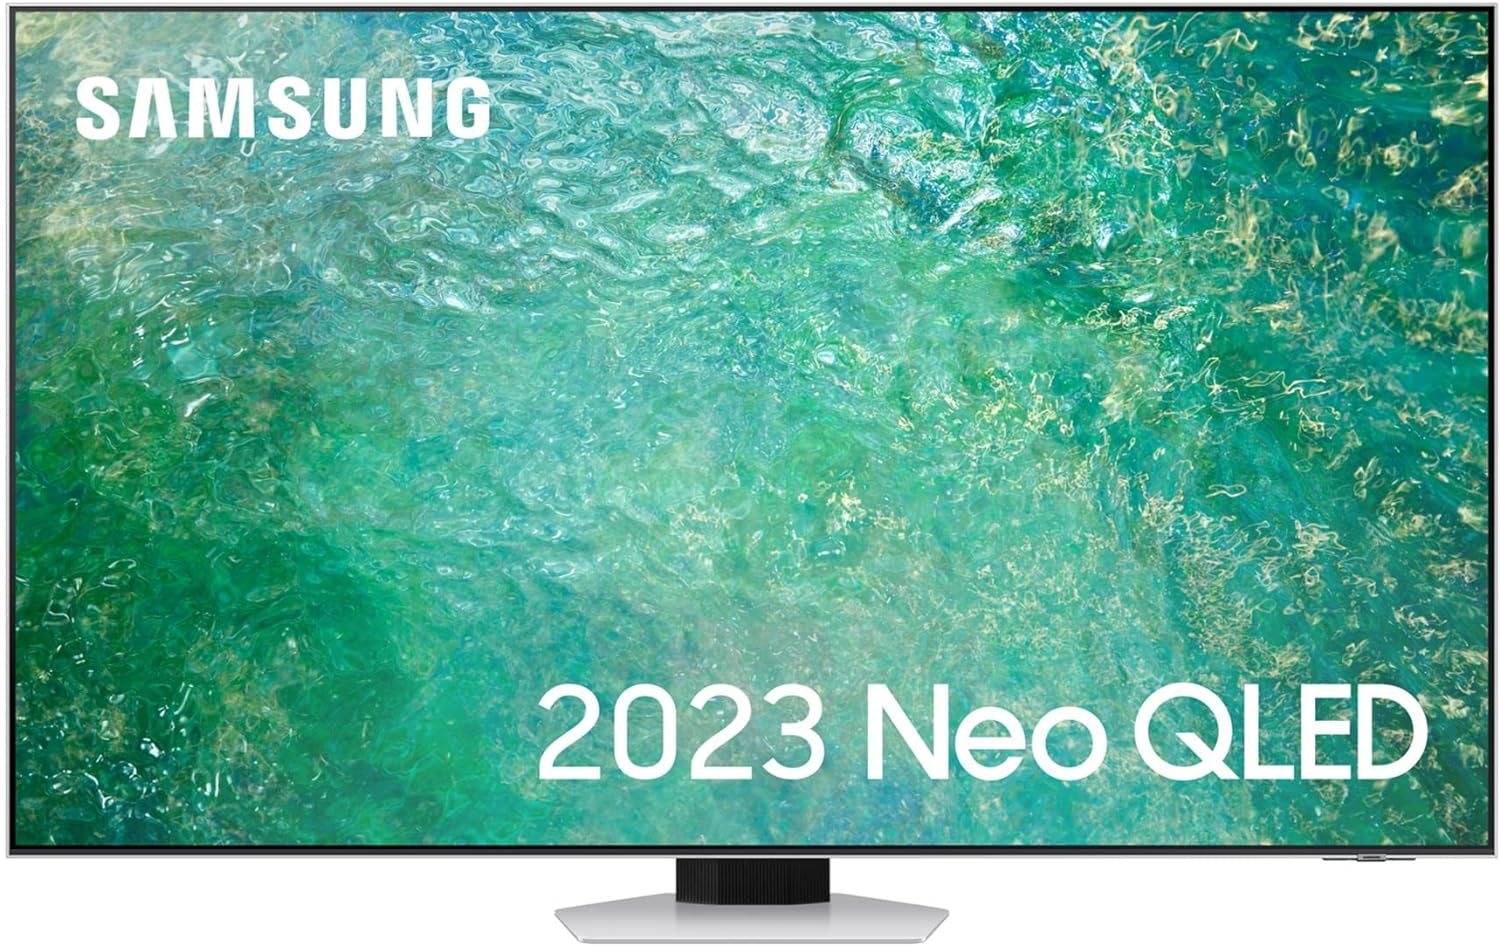 Samsung 55 Inch QN85C 4K Neo QLED HDR Smart TV (2023) - Quantum Matrix Technology With 100% Colour Volume & Alexa Built In, Object Tracking Dolby Atmos, Gaming Hub, Wide Viewing Angle, Multi View - Amazing Gadgets Outlet